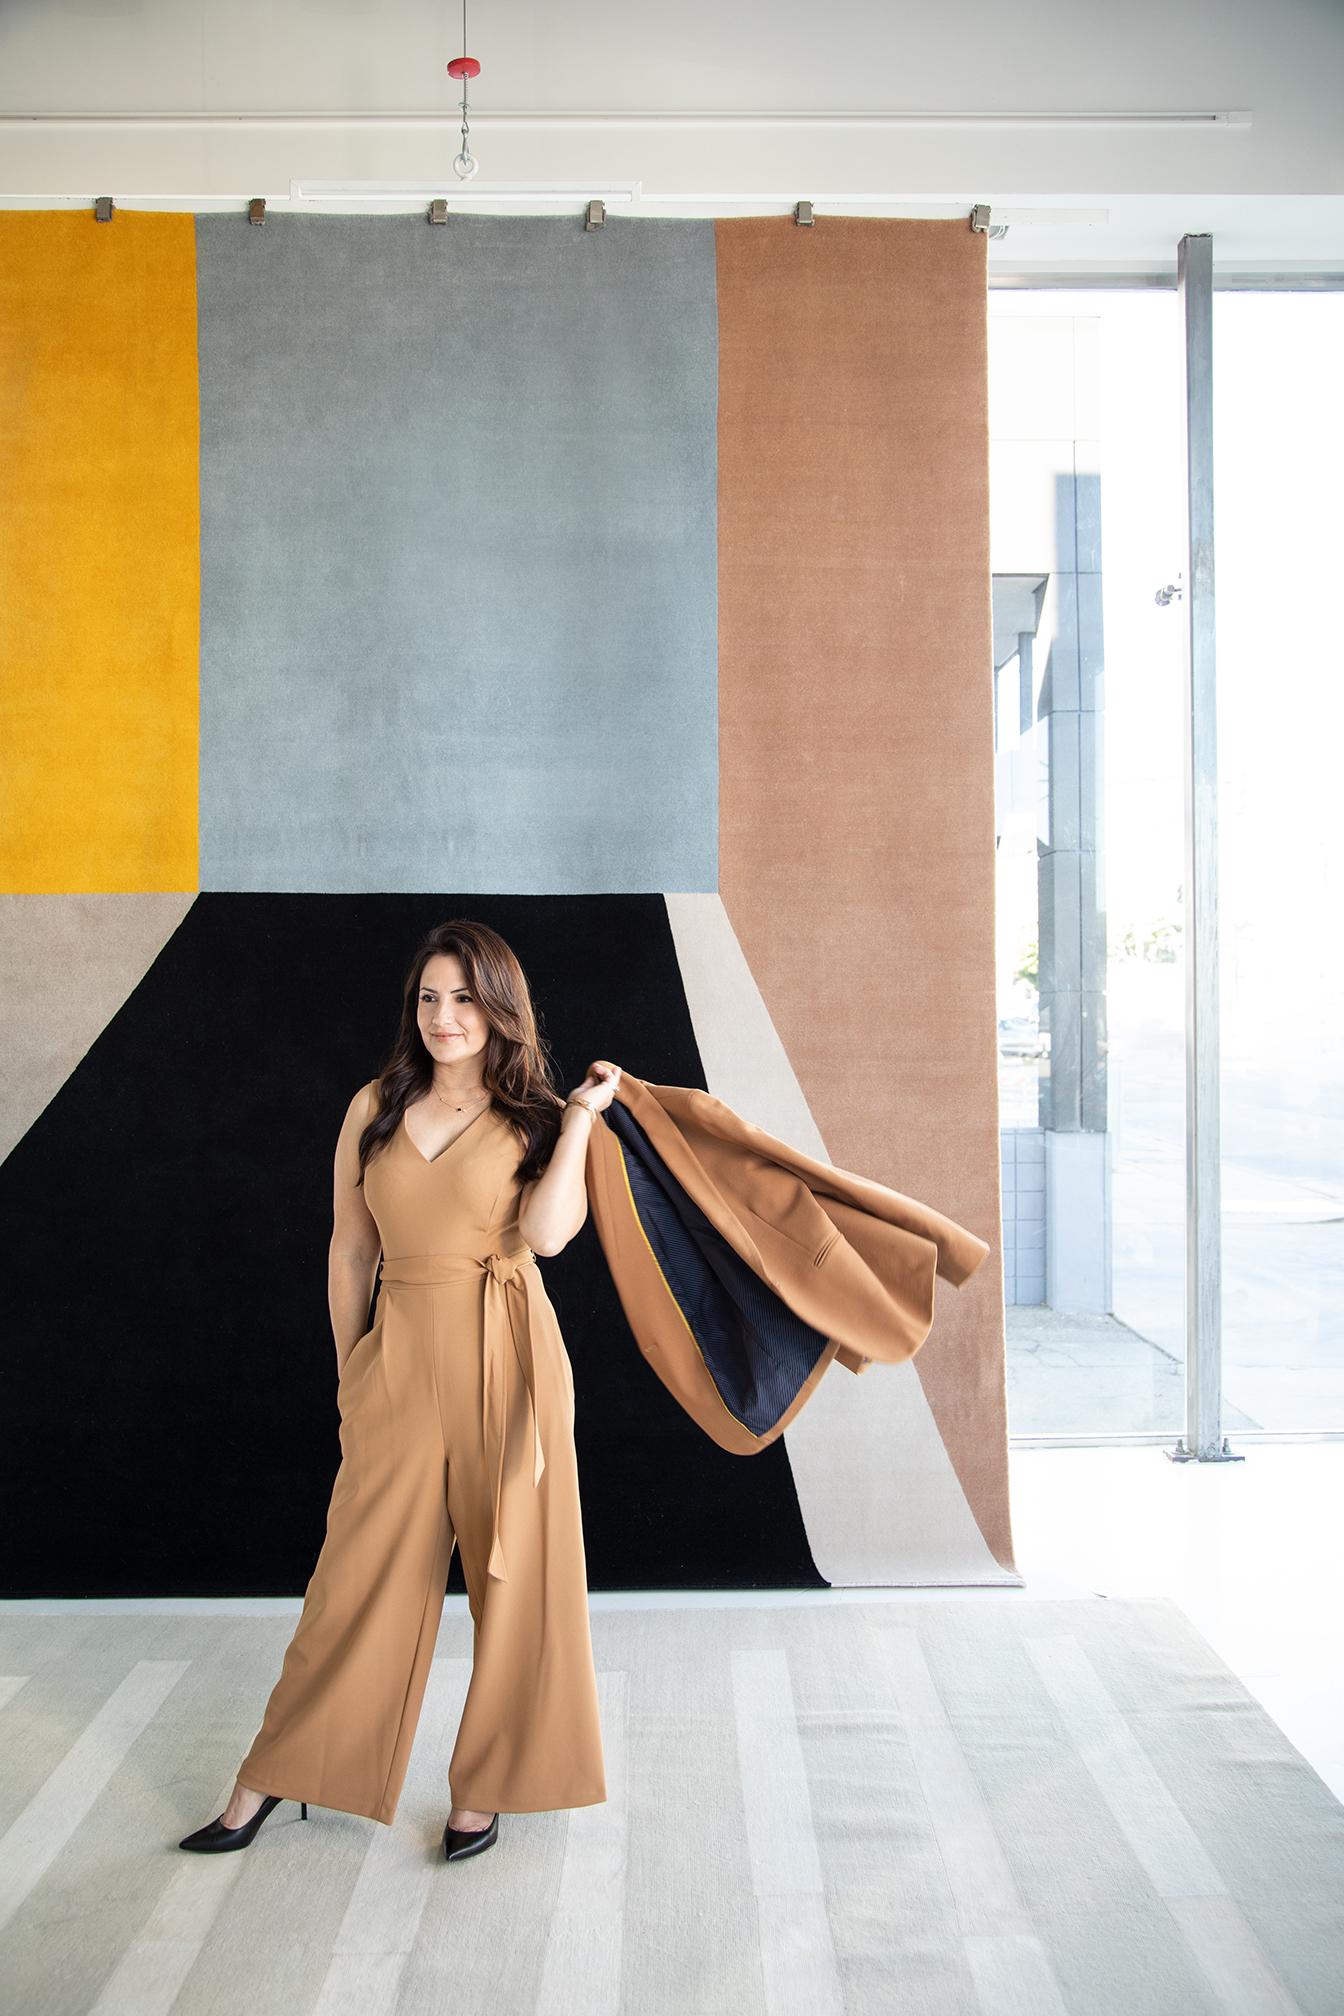 A homage to Erica's Mexican heritage, she takes inspiration from architects, Barragan and Legorreta. Muros (which means architecture walls in Spanish) is inspired by bold colors and the play on light and shadow from architectural composition.

Erica